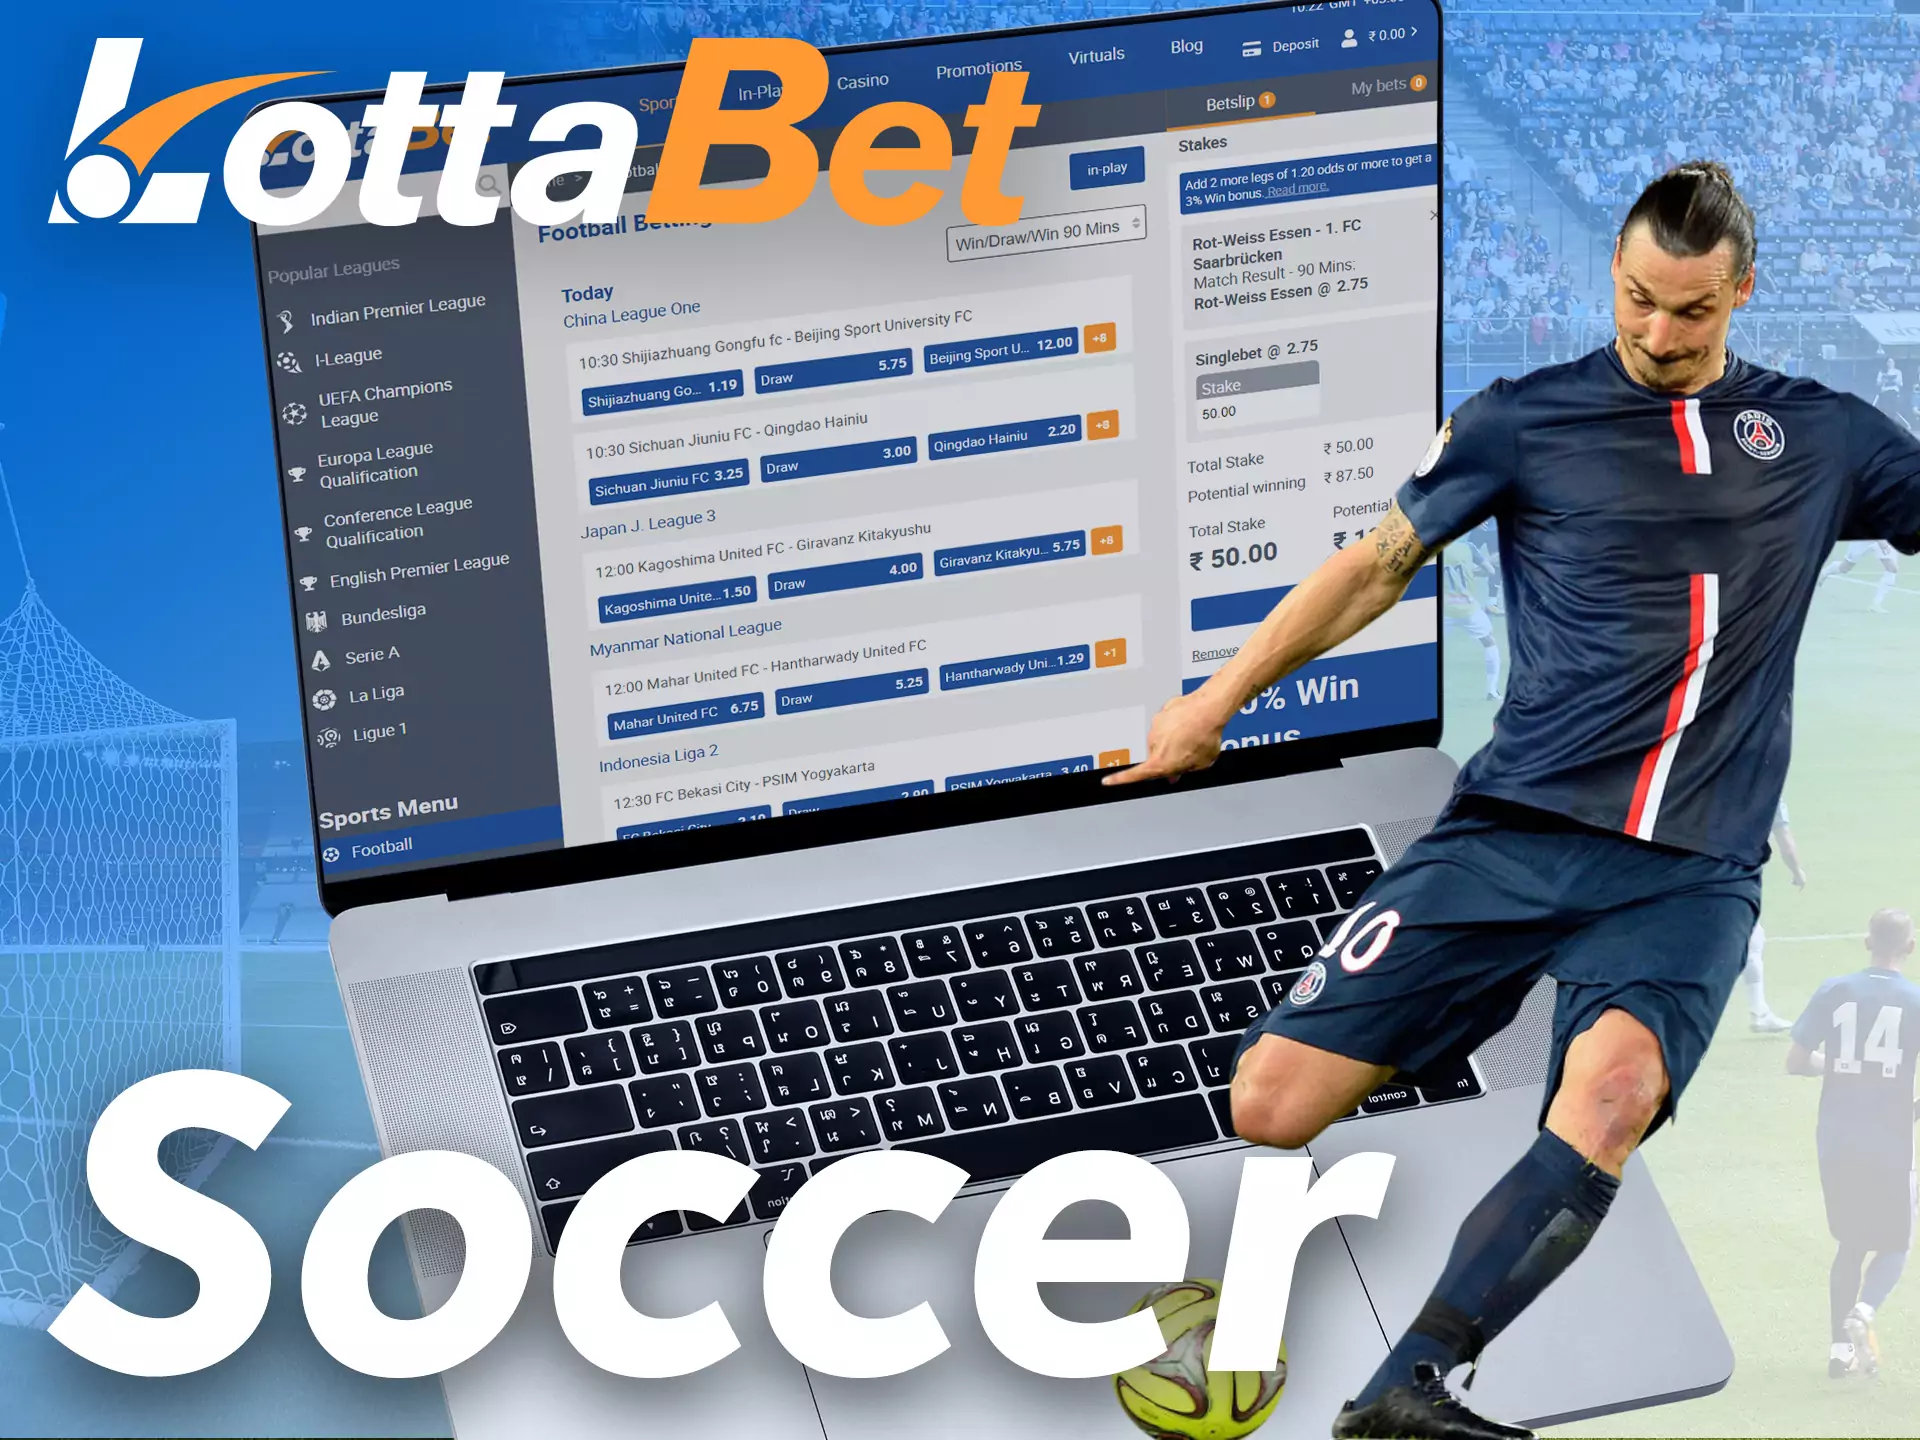 Betting on football is a popular activity among Lottabet users.